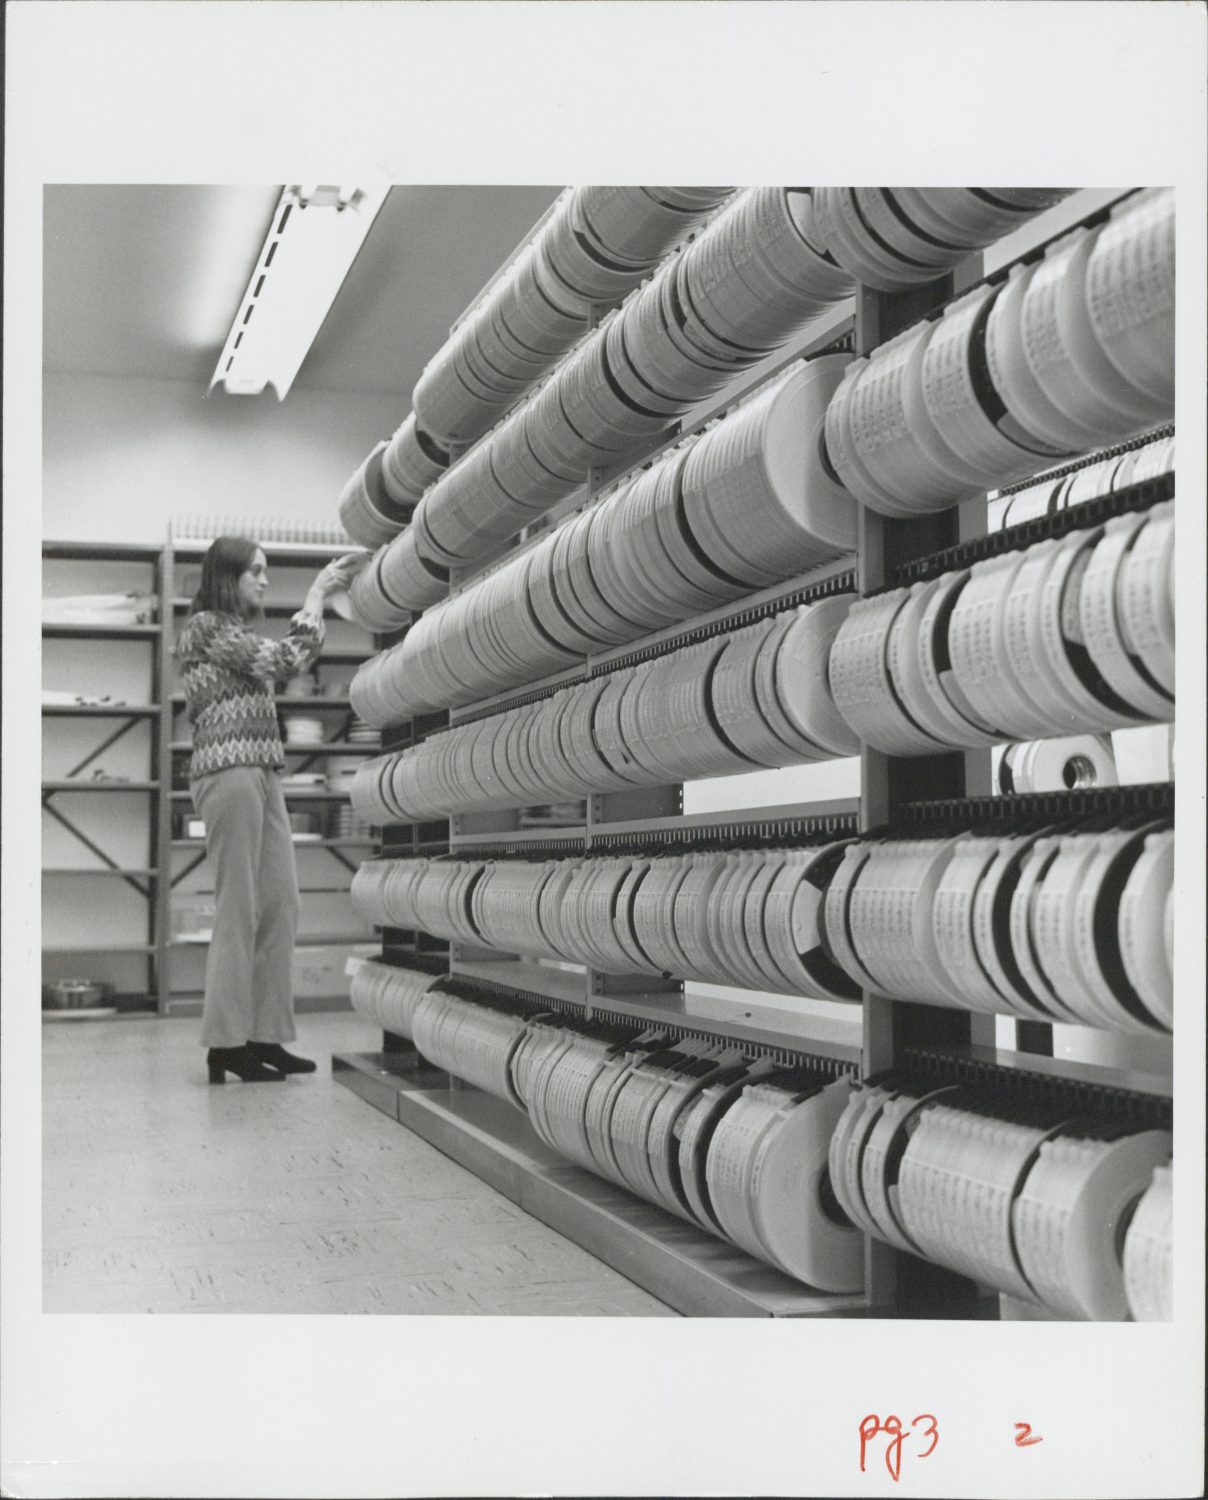 A woman goes through rows of magnetic tape reels in a storage room.